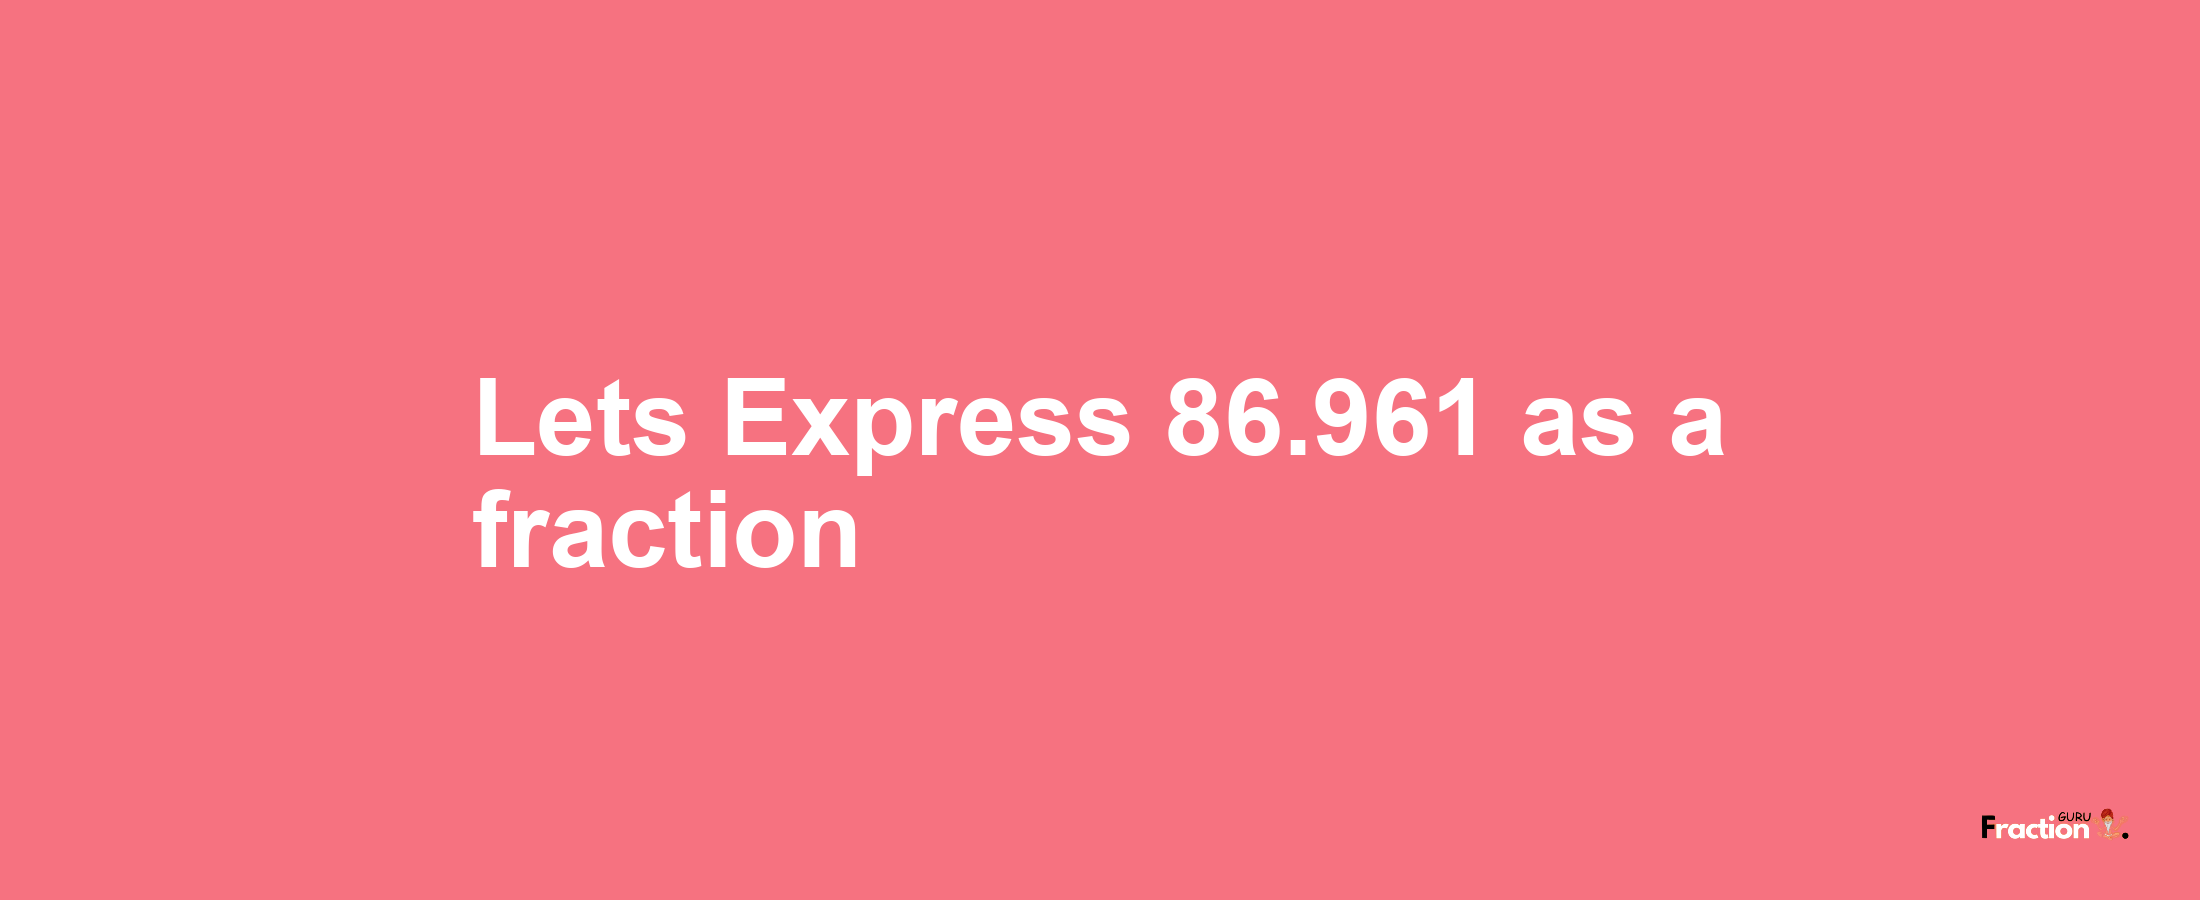 Lets Express 86.961 as afraction